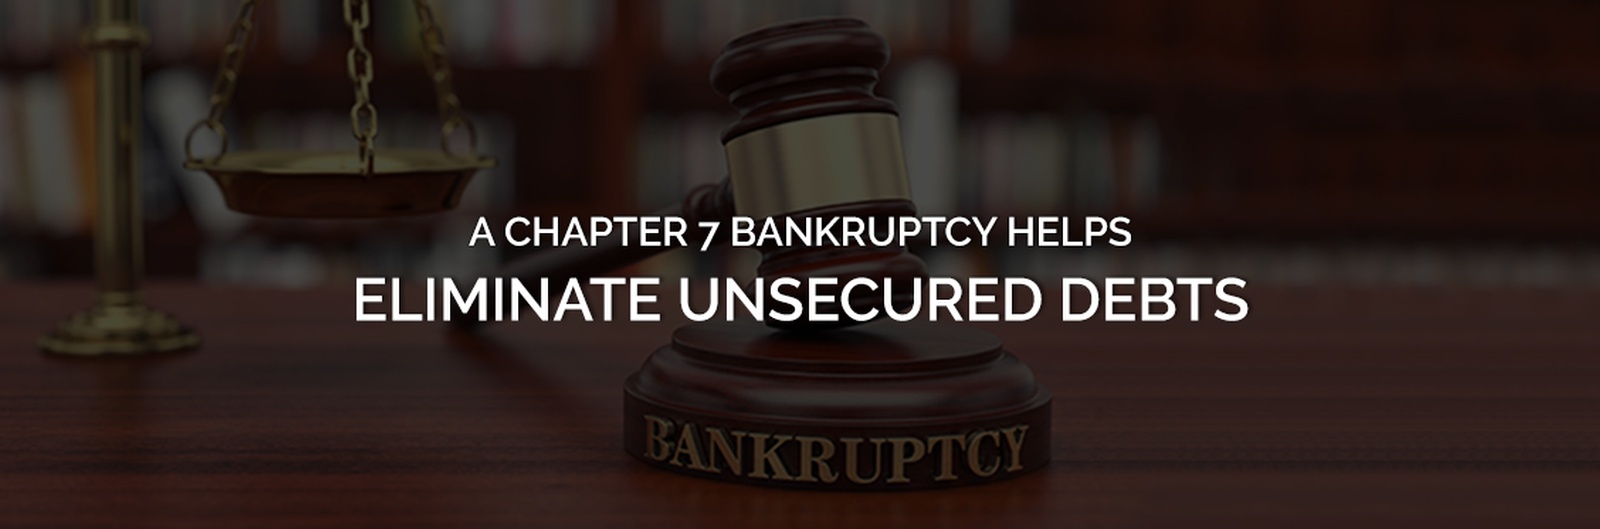 Chapter 7 Bankruptcy Services by Sam Calvert, Attorney at Law - Bankruptcy Law Firm in St. Cloud